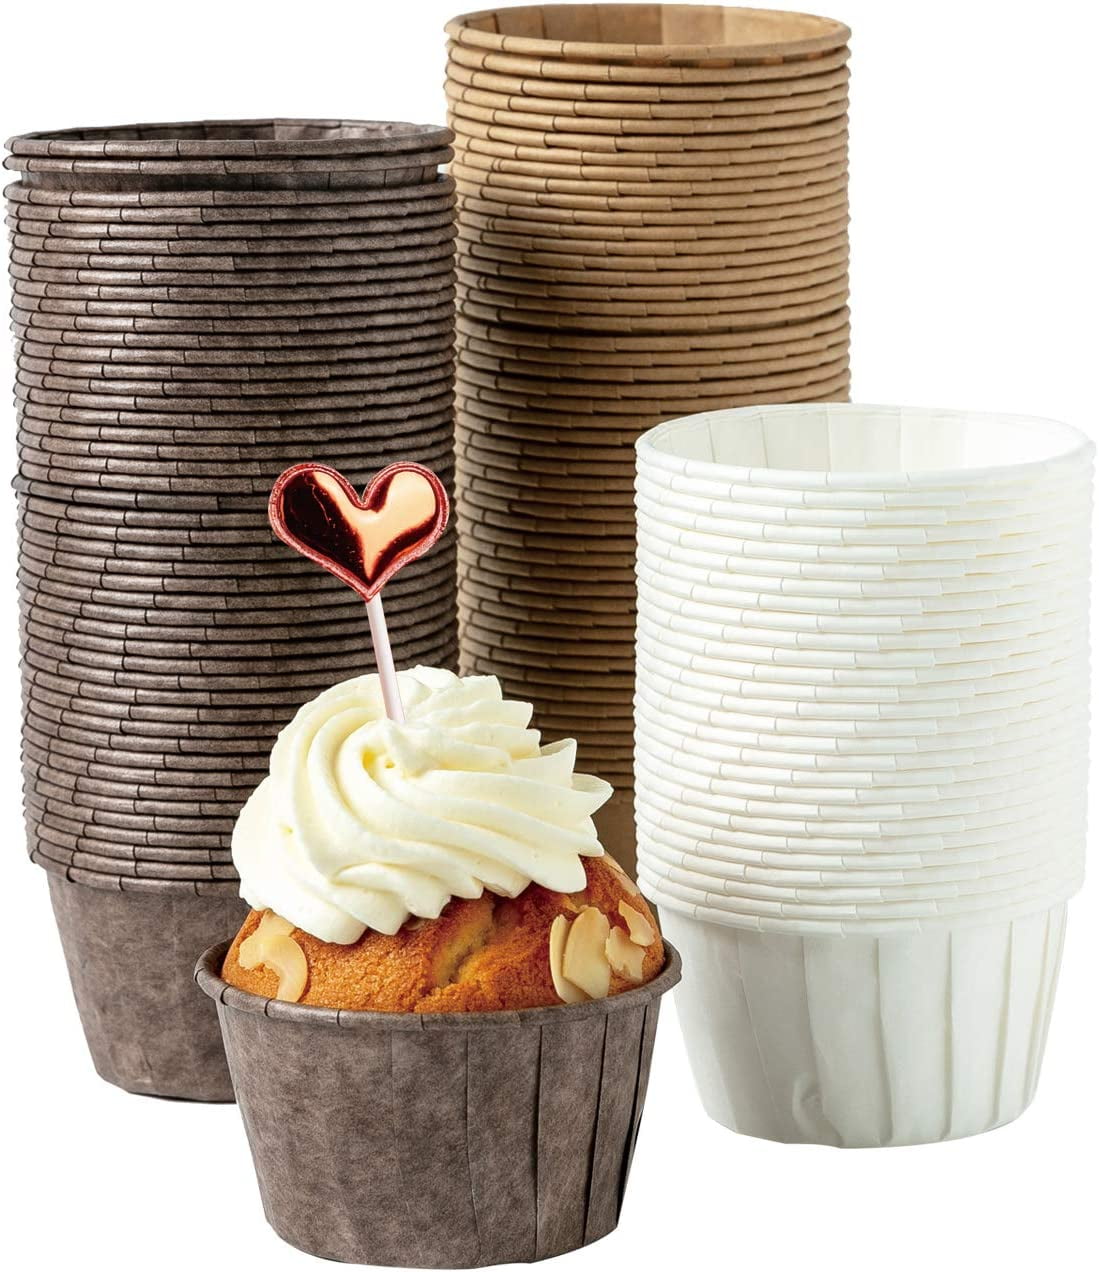 Katbite Baking Cups Cupcake Liners Muffin Liners 160PCS